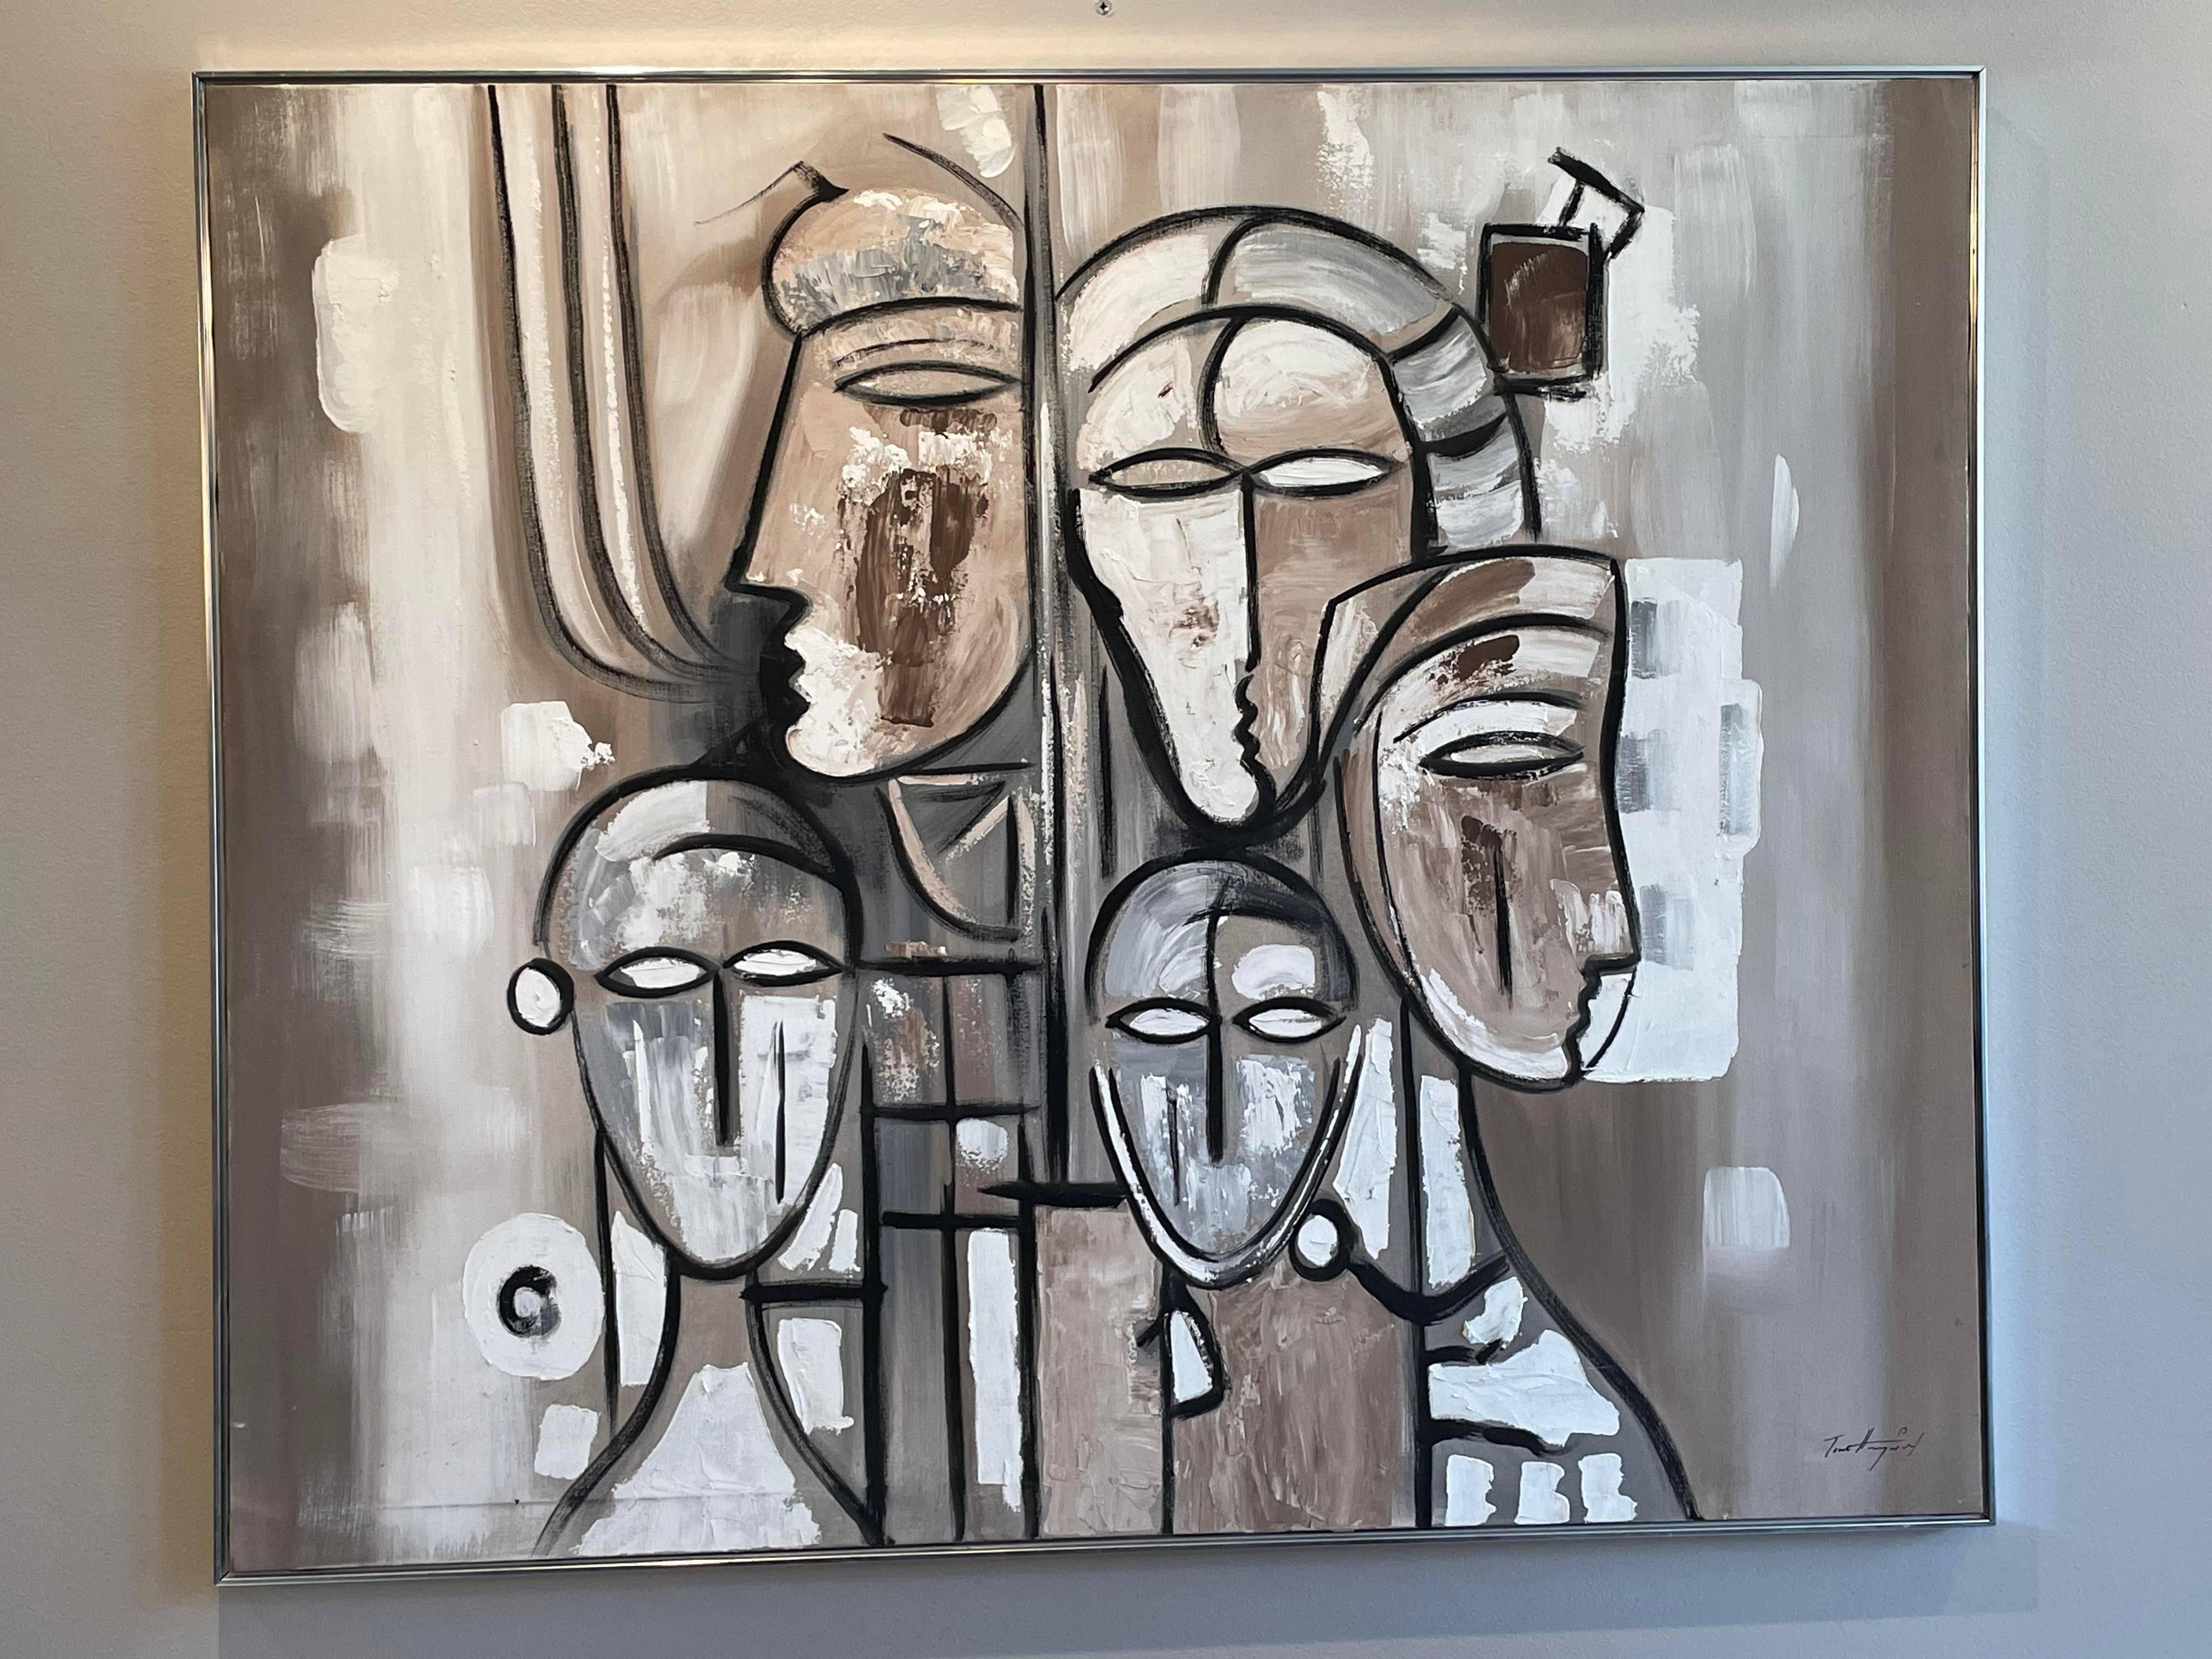 Gorgeous and show-stopping art by Tom Hayward. 5 faces in a neutral palette with texture.

Dimensions: 49